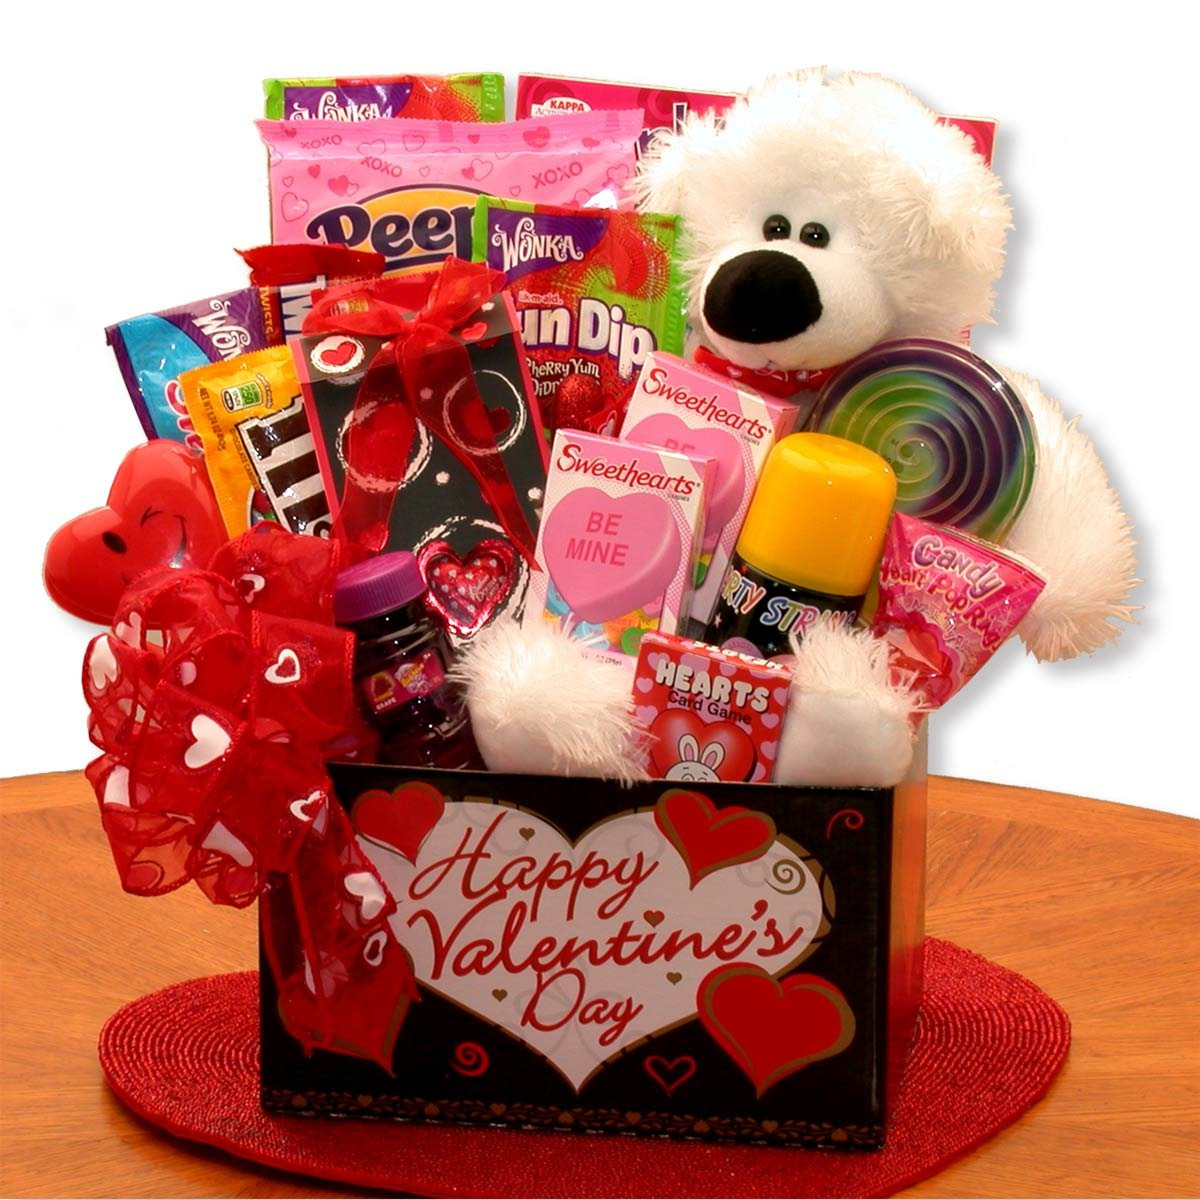 Valentine Gift Ideas For Her
 Cute His & Her Valentine Gift Ideas For Your Loved es